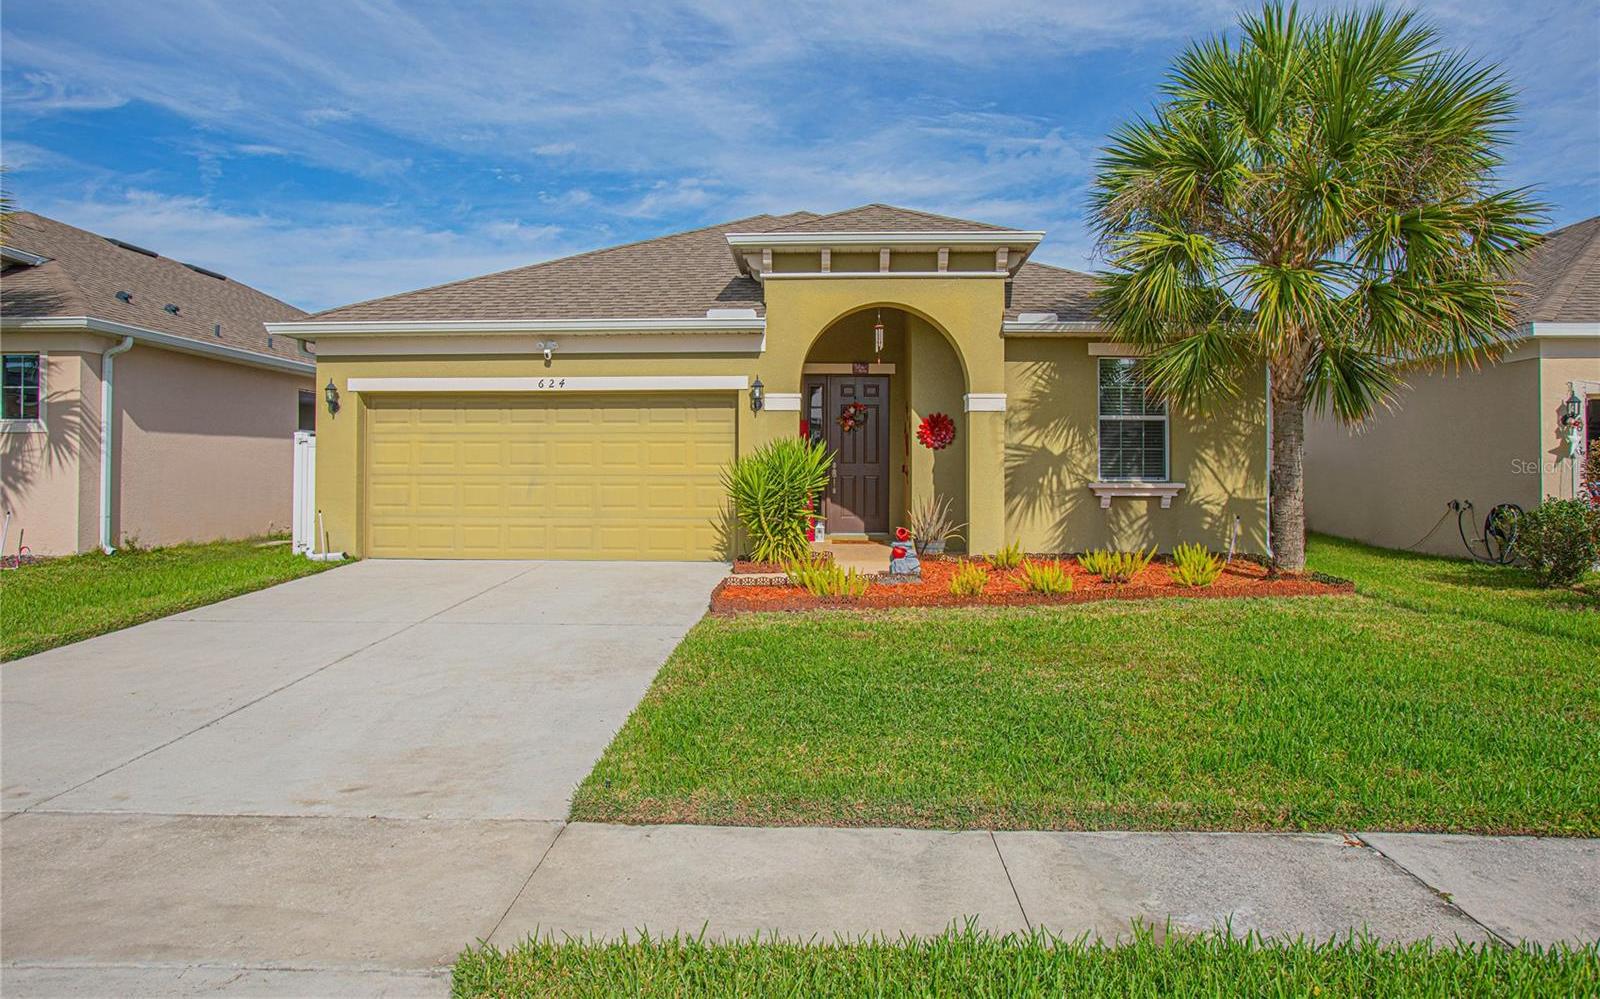 Photo one of 624 Star Magnolia Dr Kissimmee FL 34744 | MLS S5095863